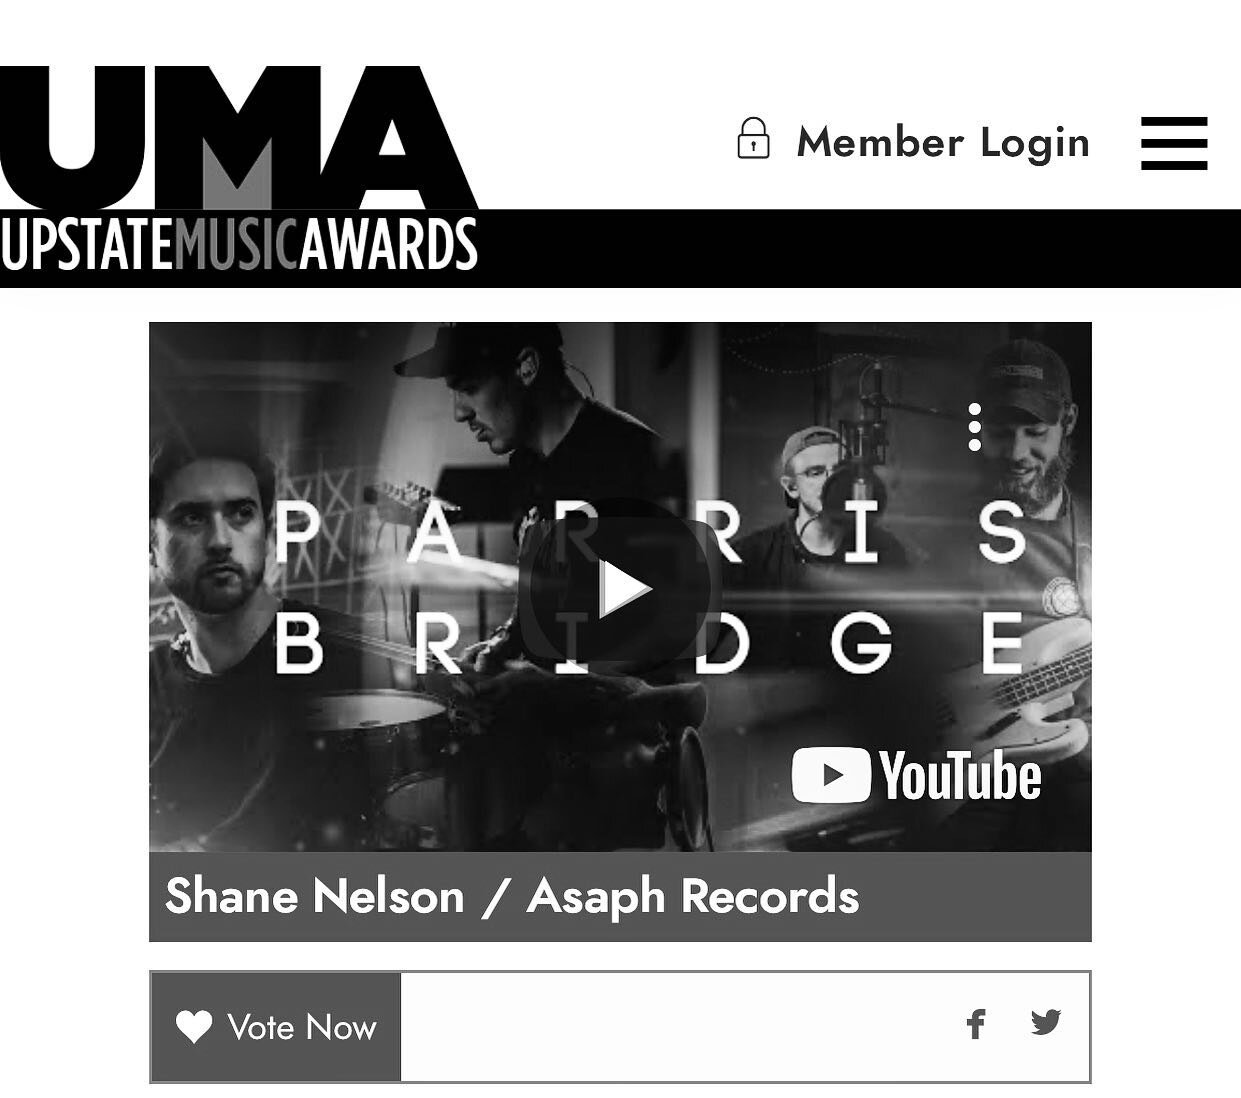 VOTING IS LIVE! I&rsquo;ve been nominated for best studio in the upstate by @upstatemusicawards. PLEASE go to upstatemusicawards.com and vote for Asaph Records! (you have to make a account but that takes like 30 seconds)